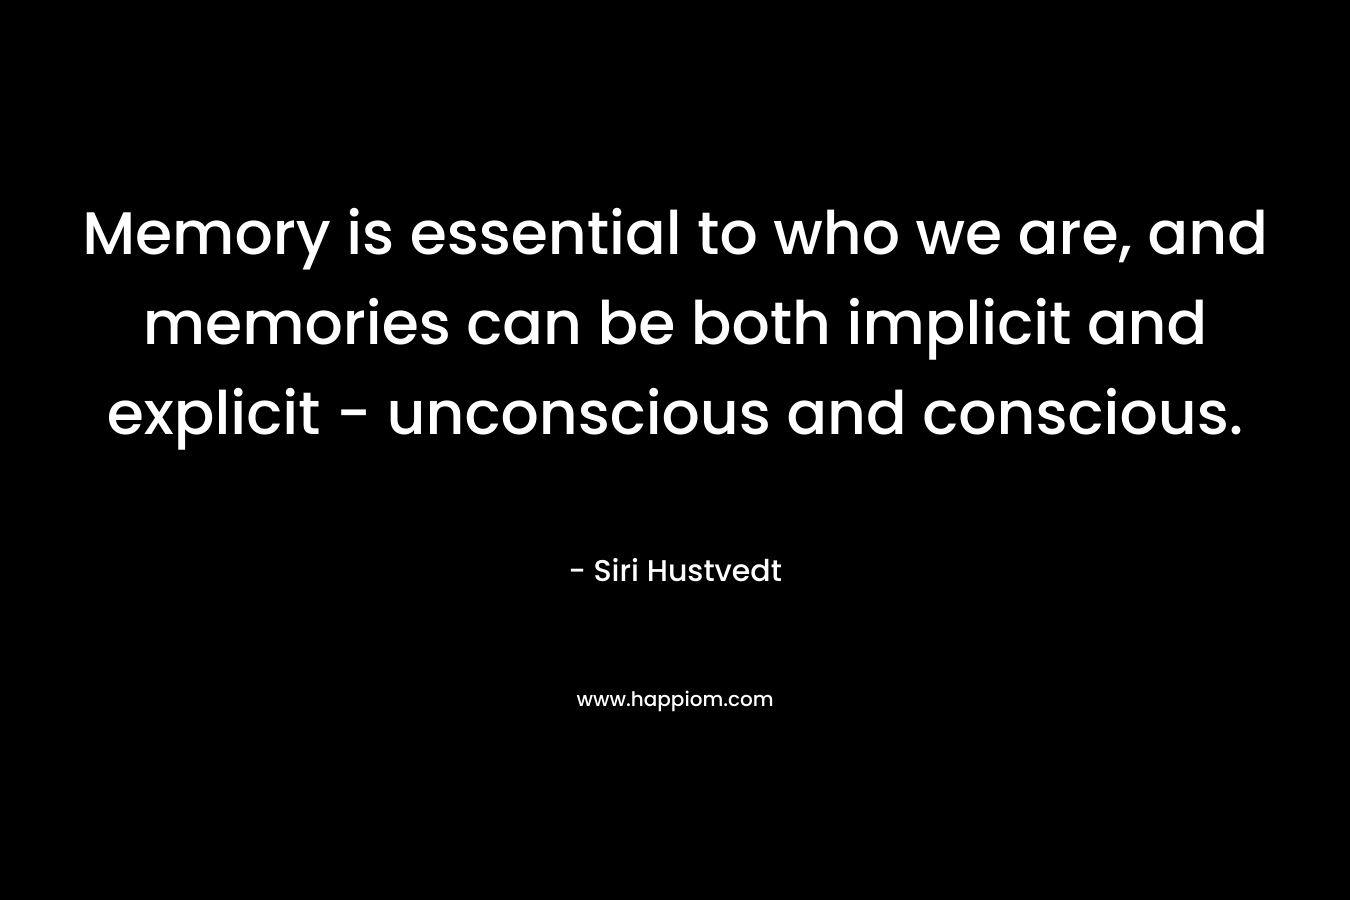 Memory is essential to who we are, and memories can be both implicit and explicit - unconscious and conscious.